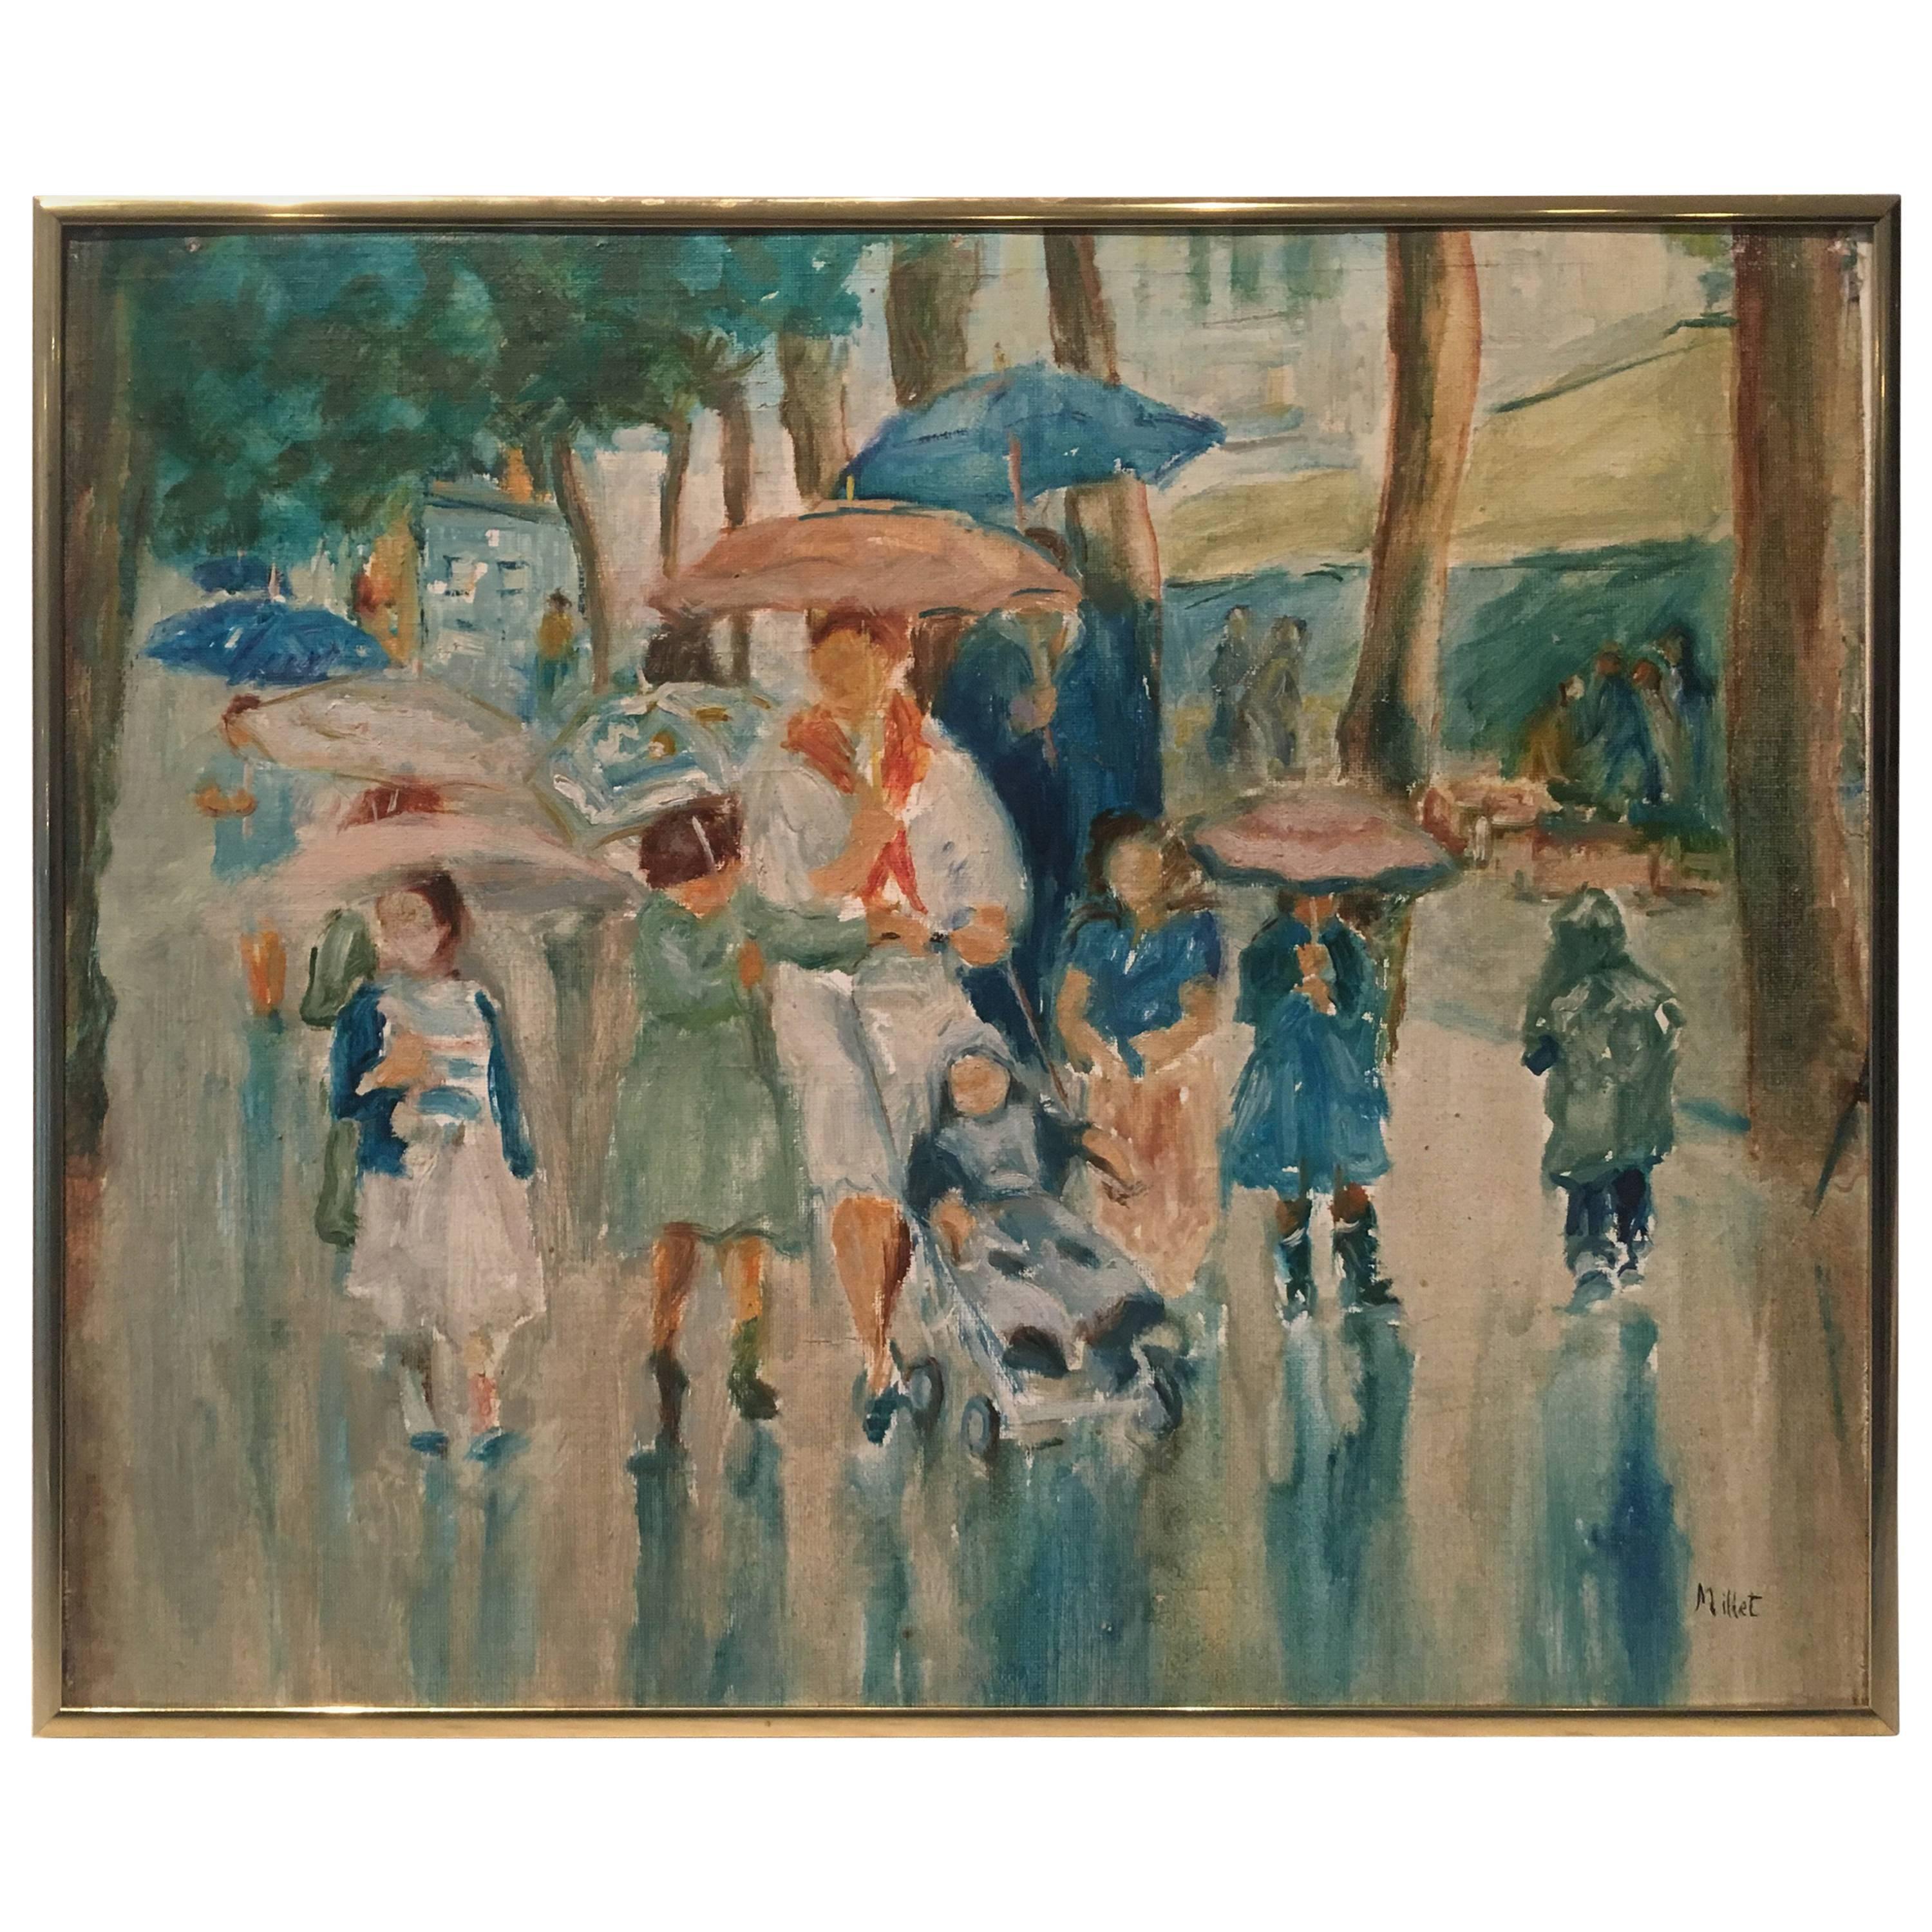 Charming Impressionist Painting of Women and Children in the Rain